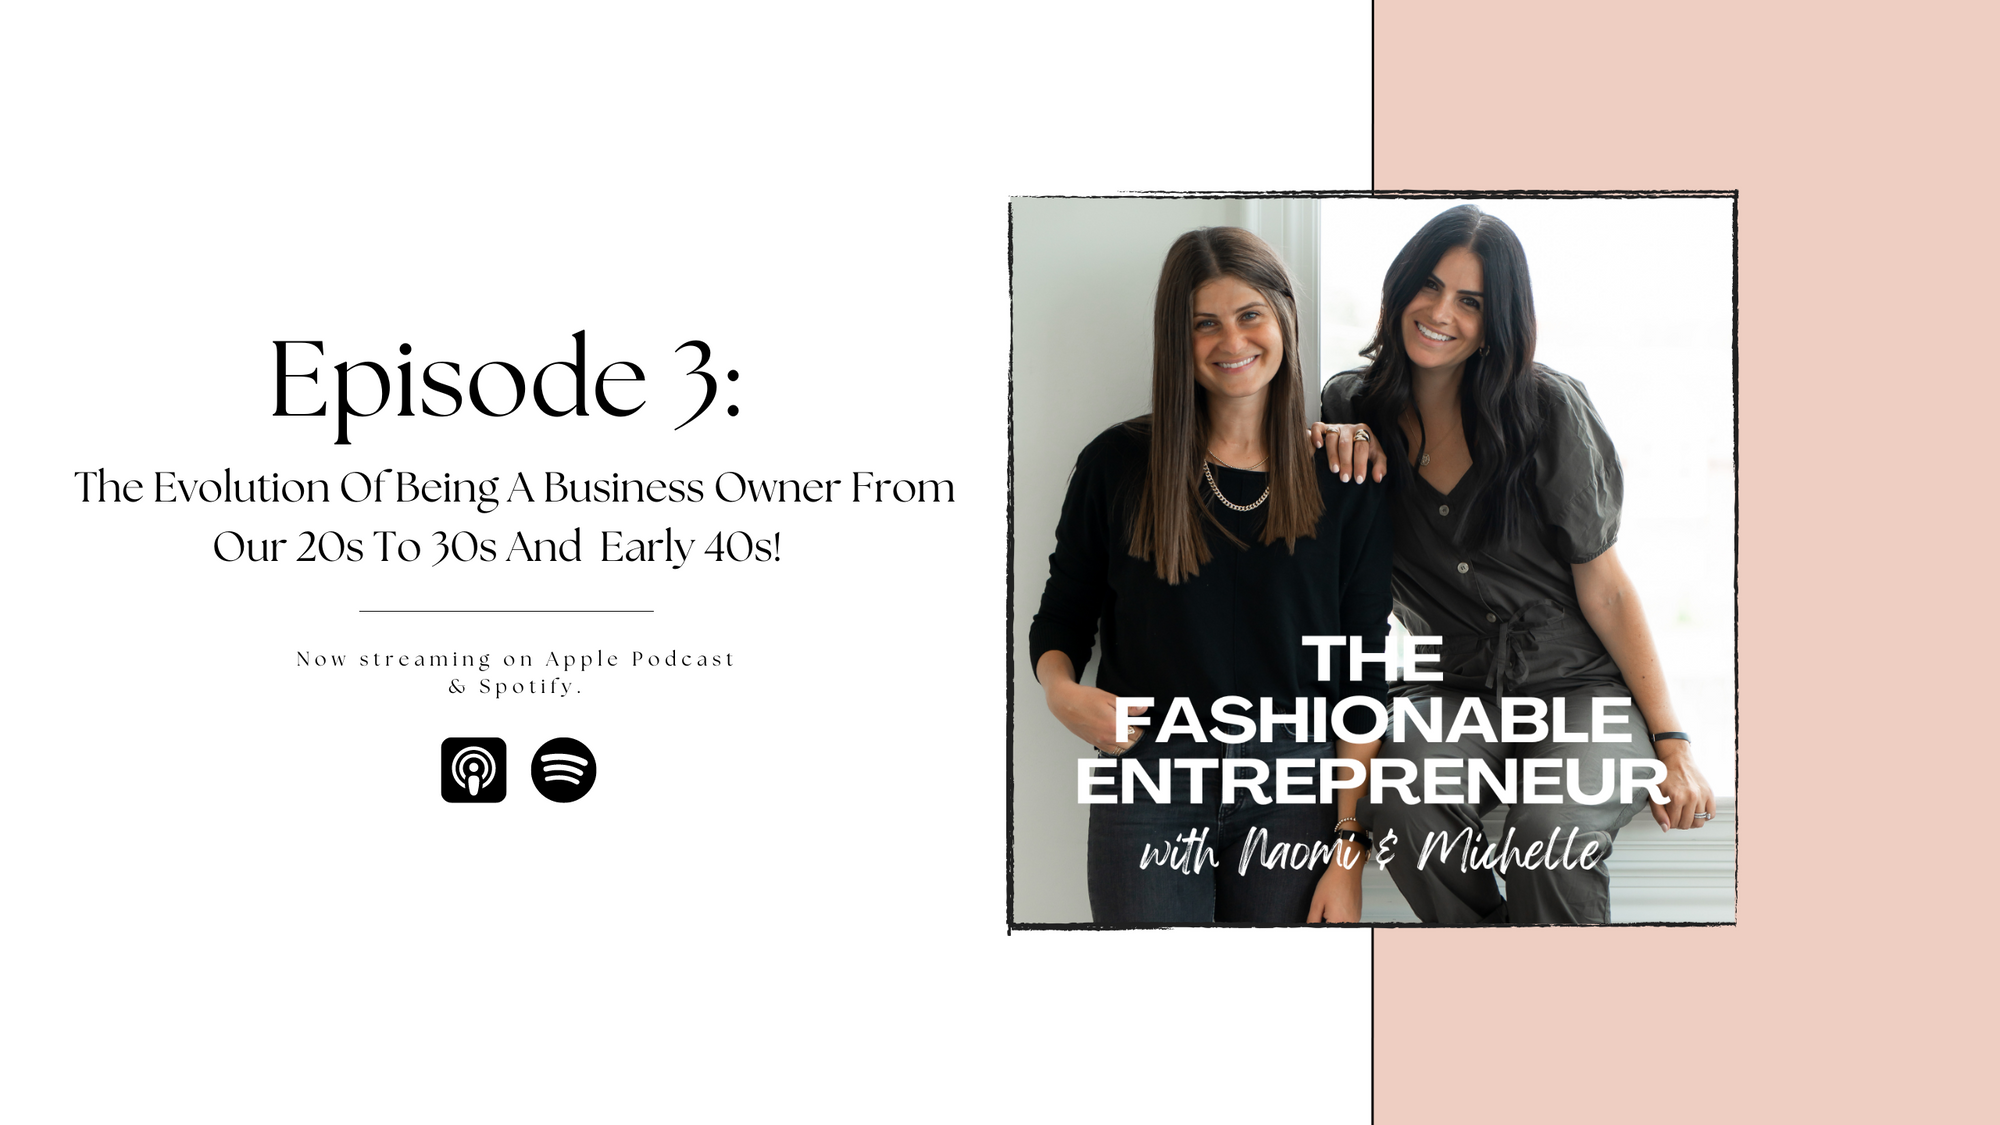 Episode 3: The Evolution Of Being A Business Owner From Our 20s To 30s & early 40s